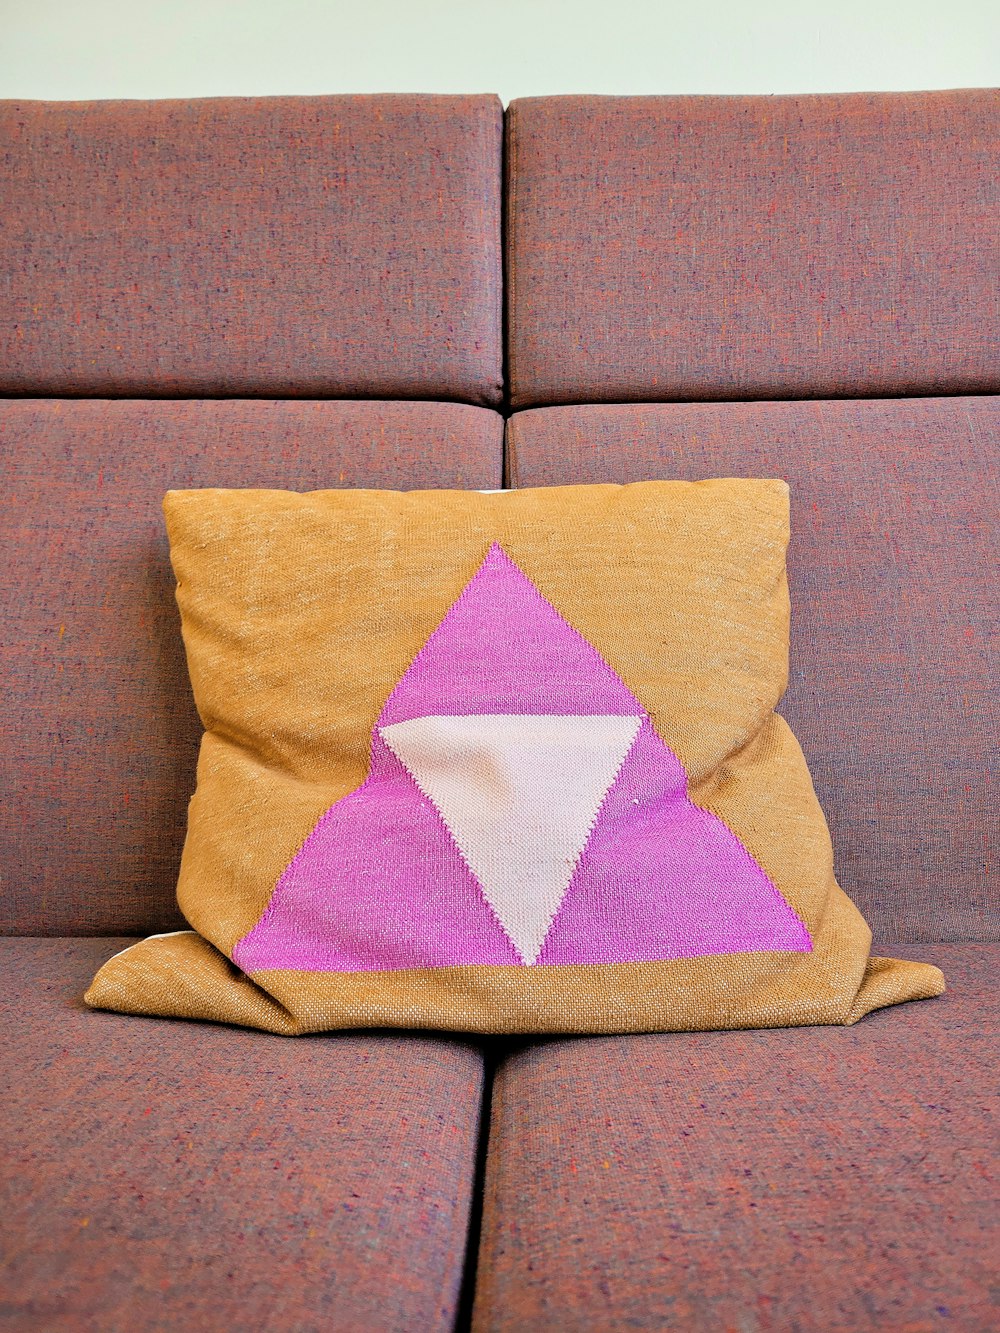 a brown couch with a pink and white pillow on it